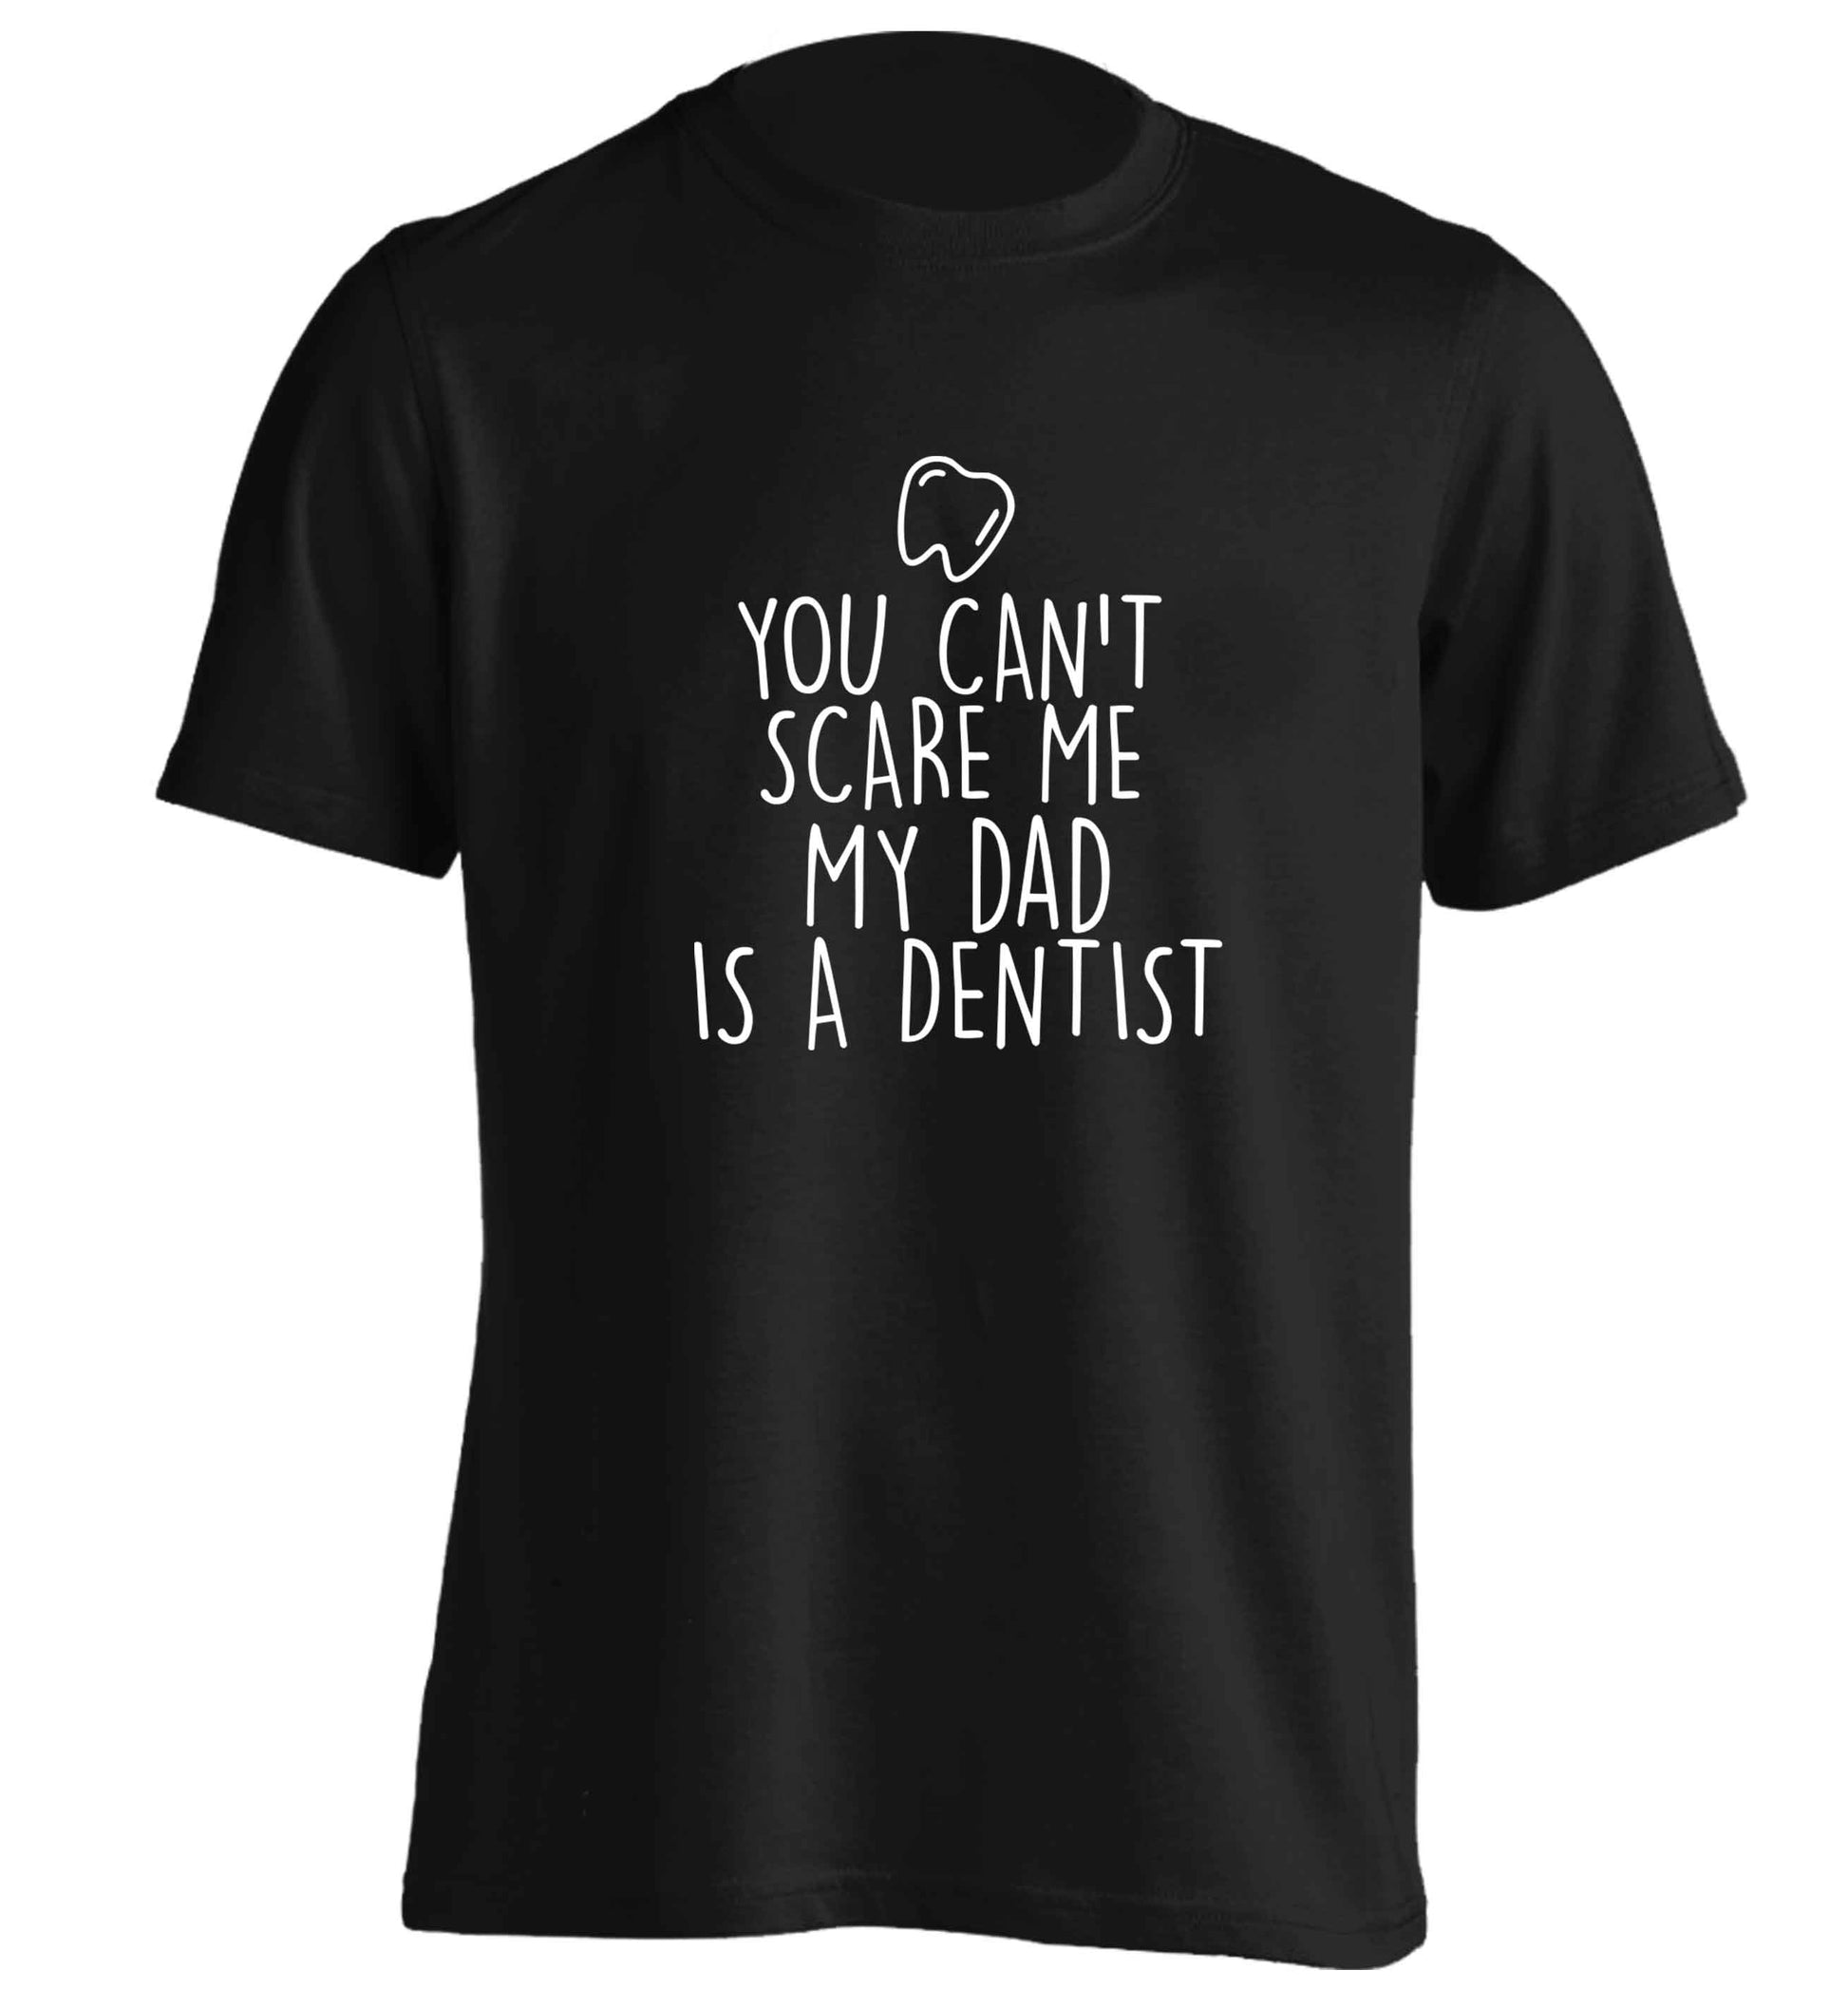 You can't scare me my dad is a dentist adults unisex black Tshirt 2XL